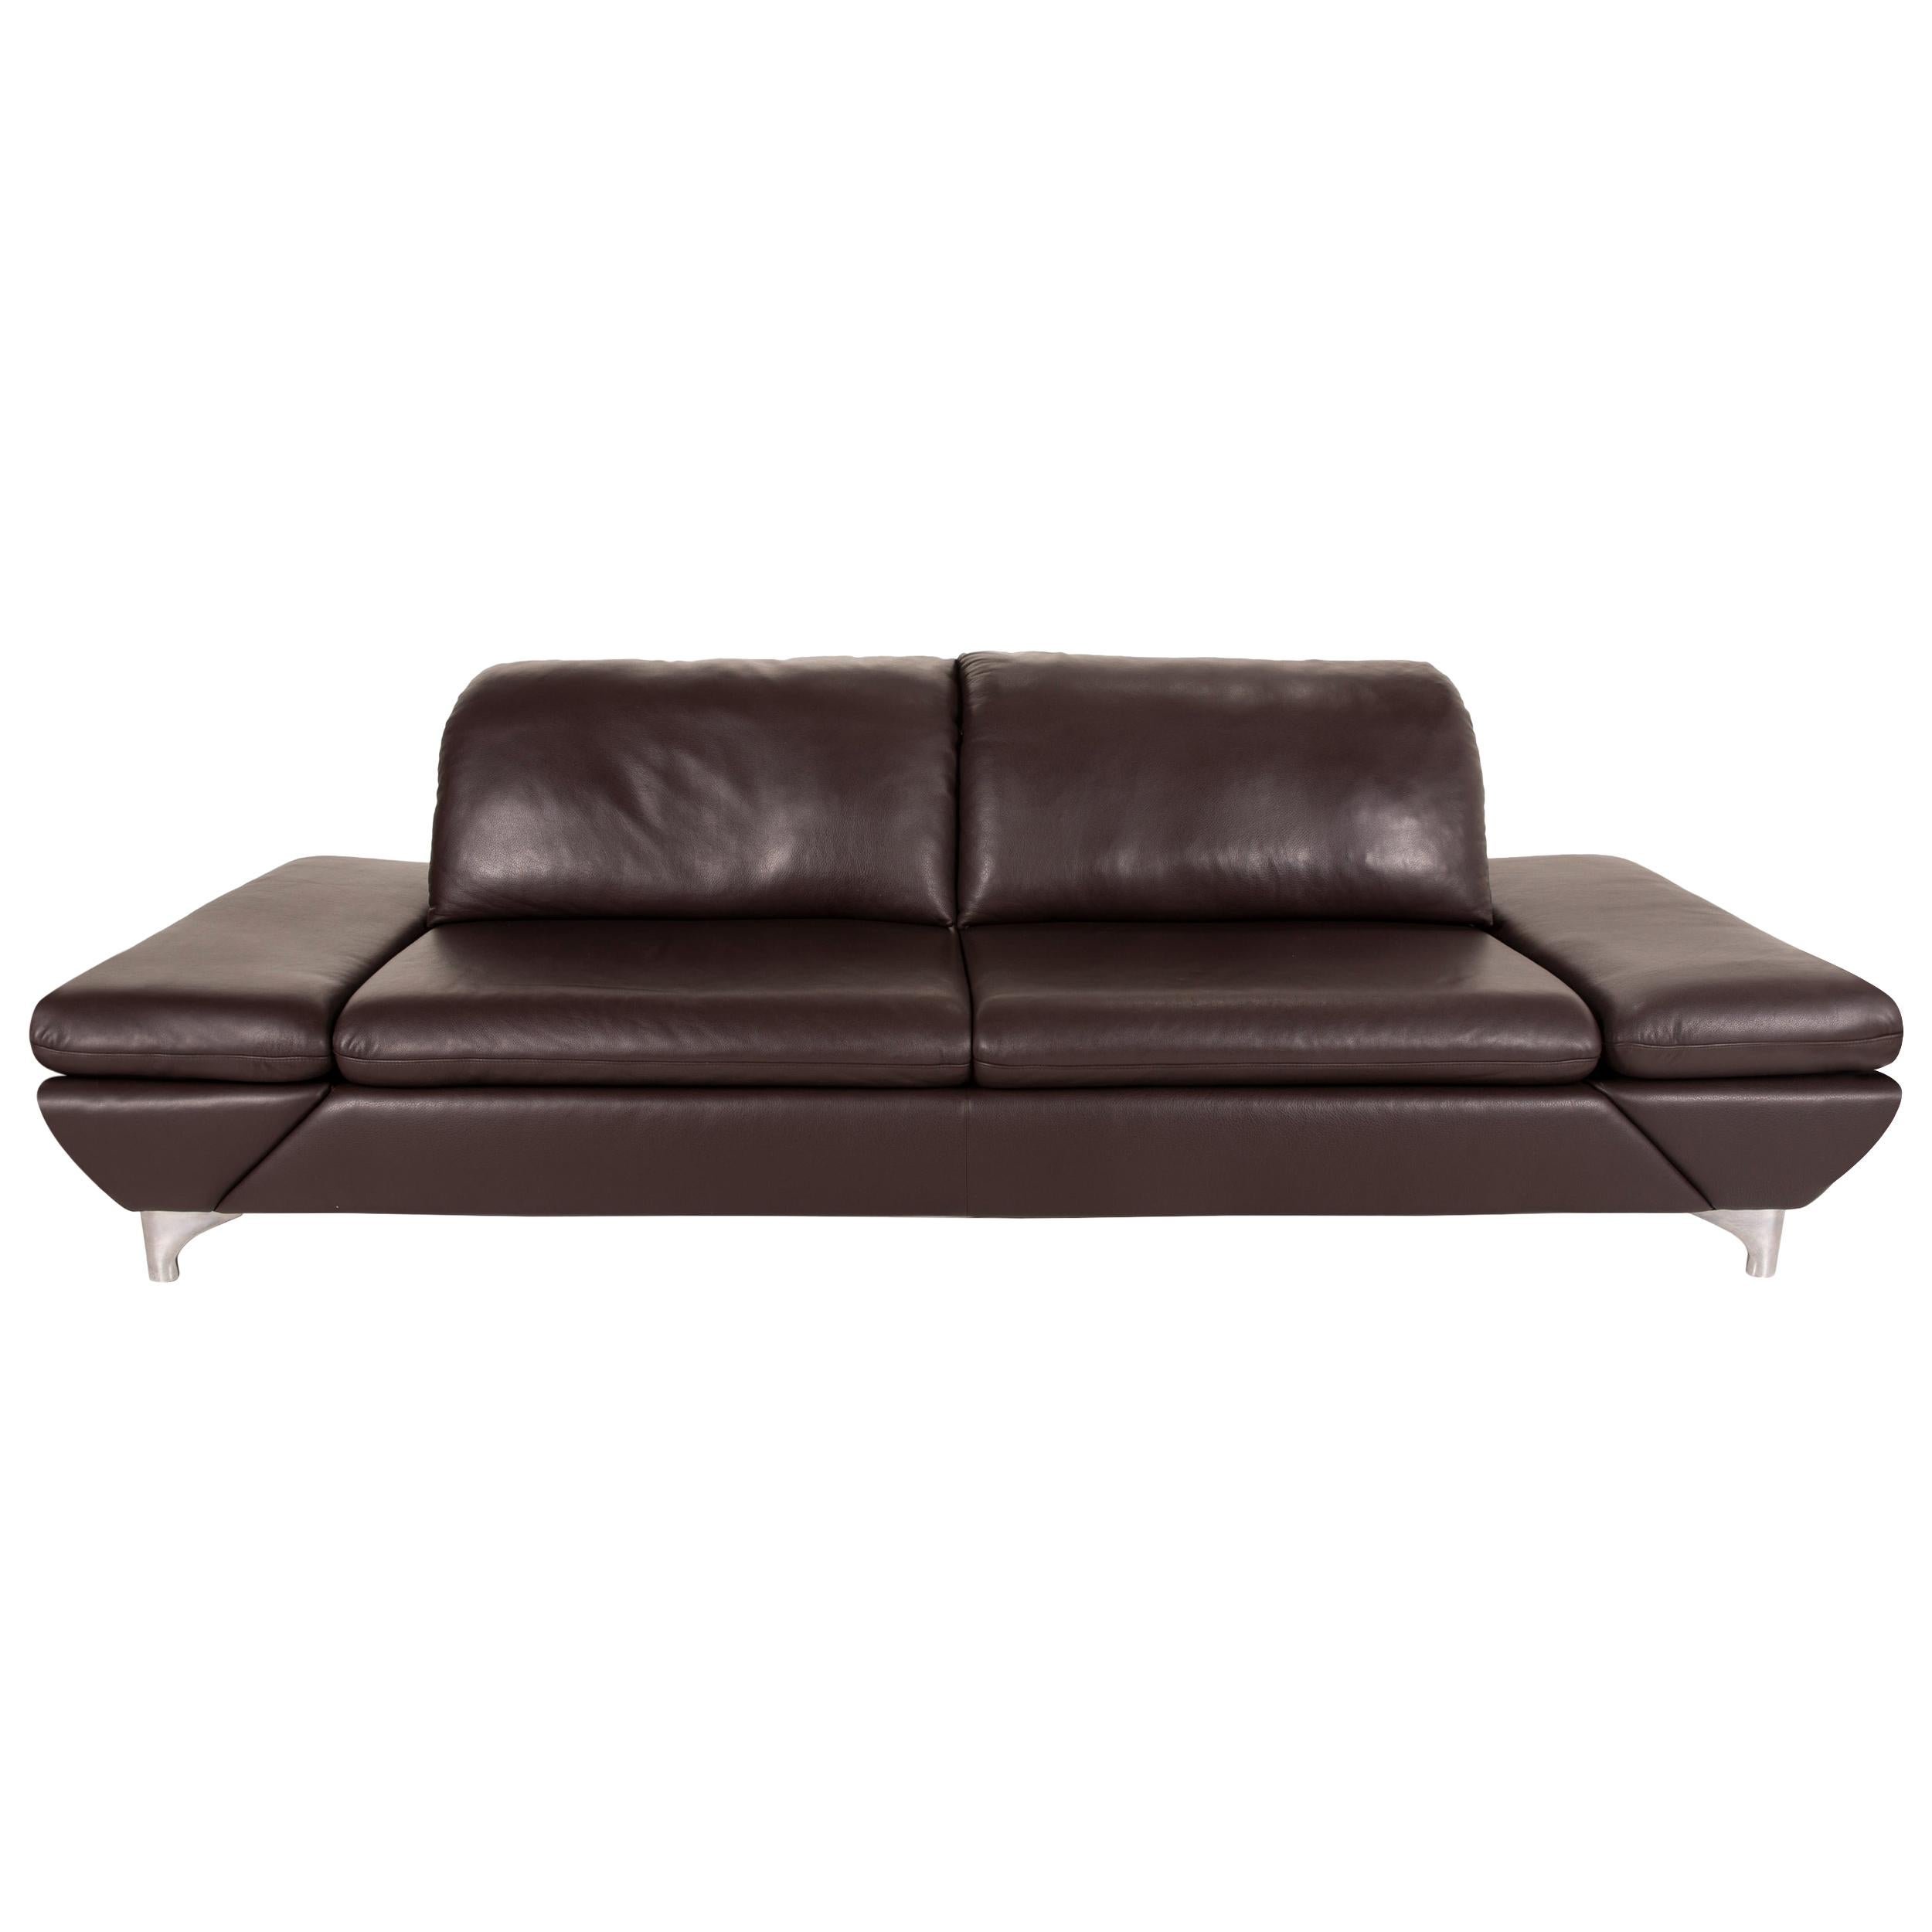 Willi Schillig Taoo Leather Sofa Brown Three-Seater Sofa Function Couch Dark For Sale